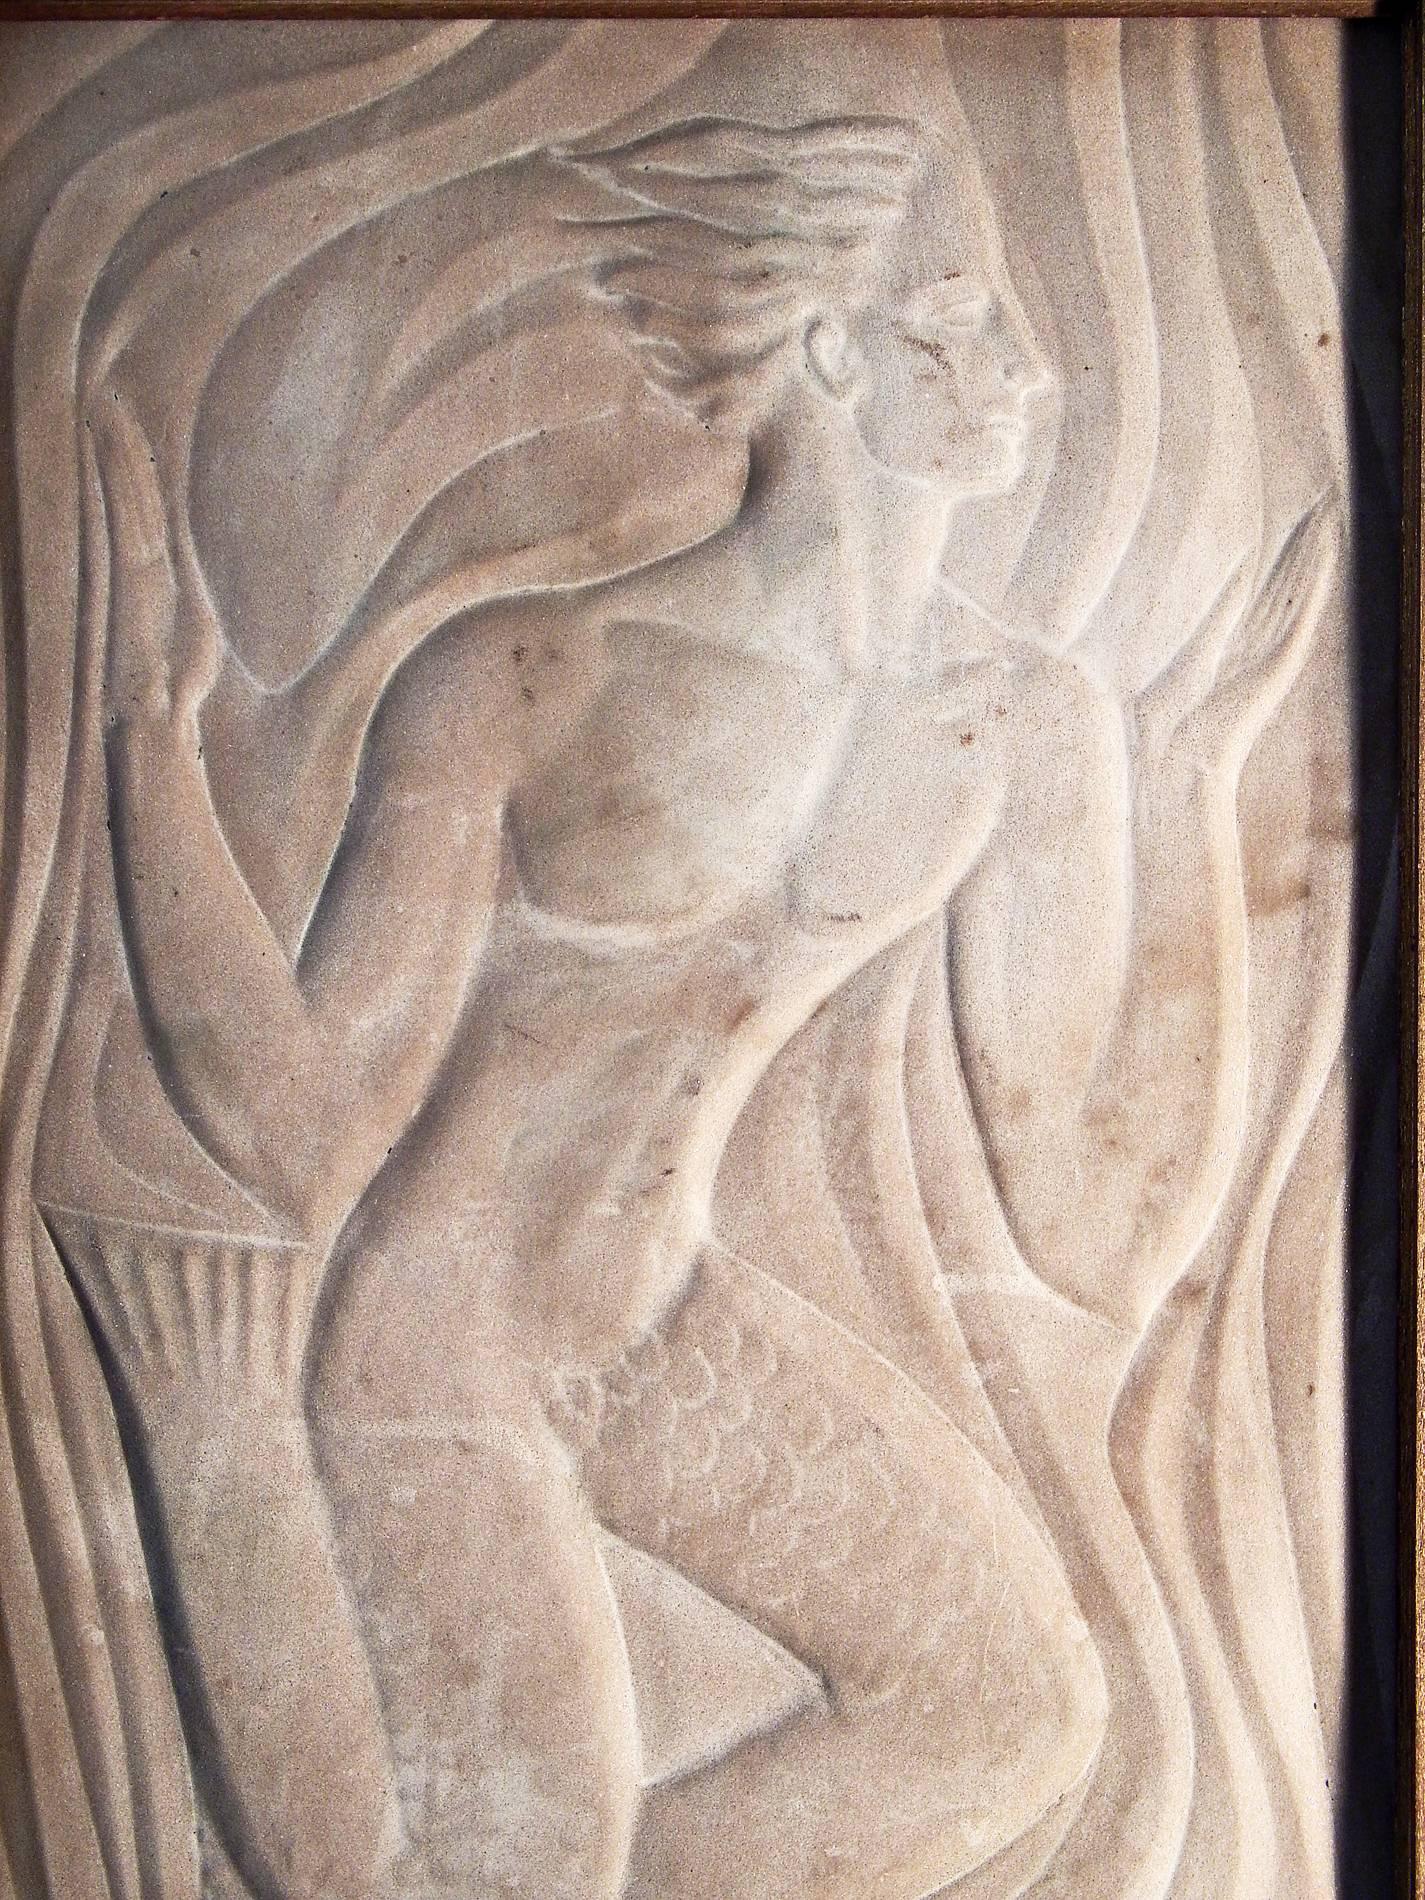 This striking and dramatic depiction of a stylized merman in an underwater scene vibrating with energy, executed in low relief in very fine-grained sandstone, is a very fine example of Art Deco sculpture. The merman's face is shown in profile, while